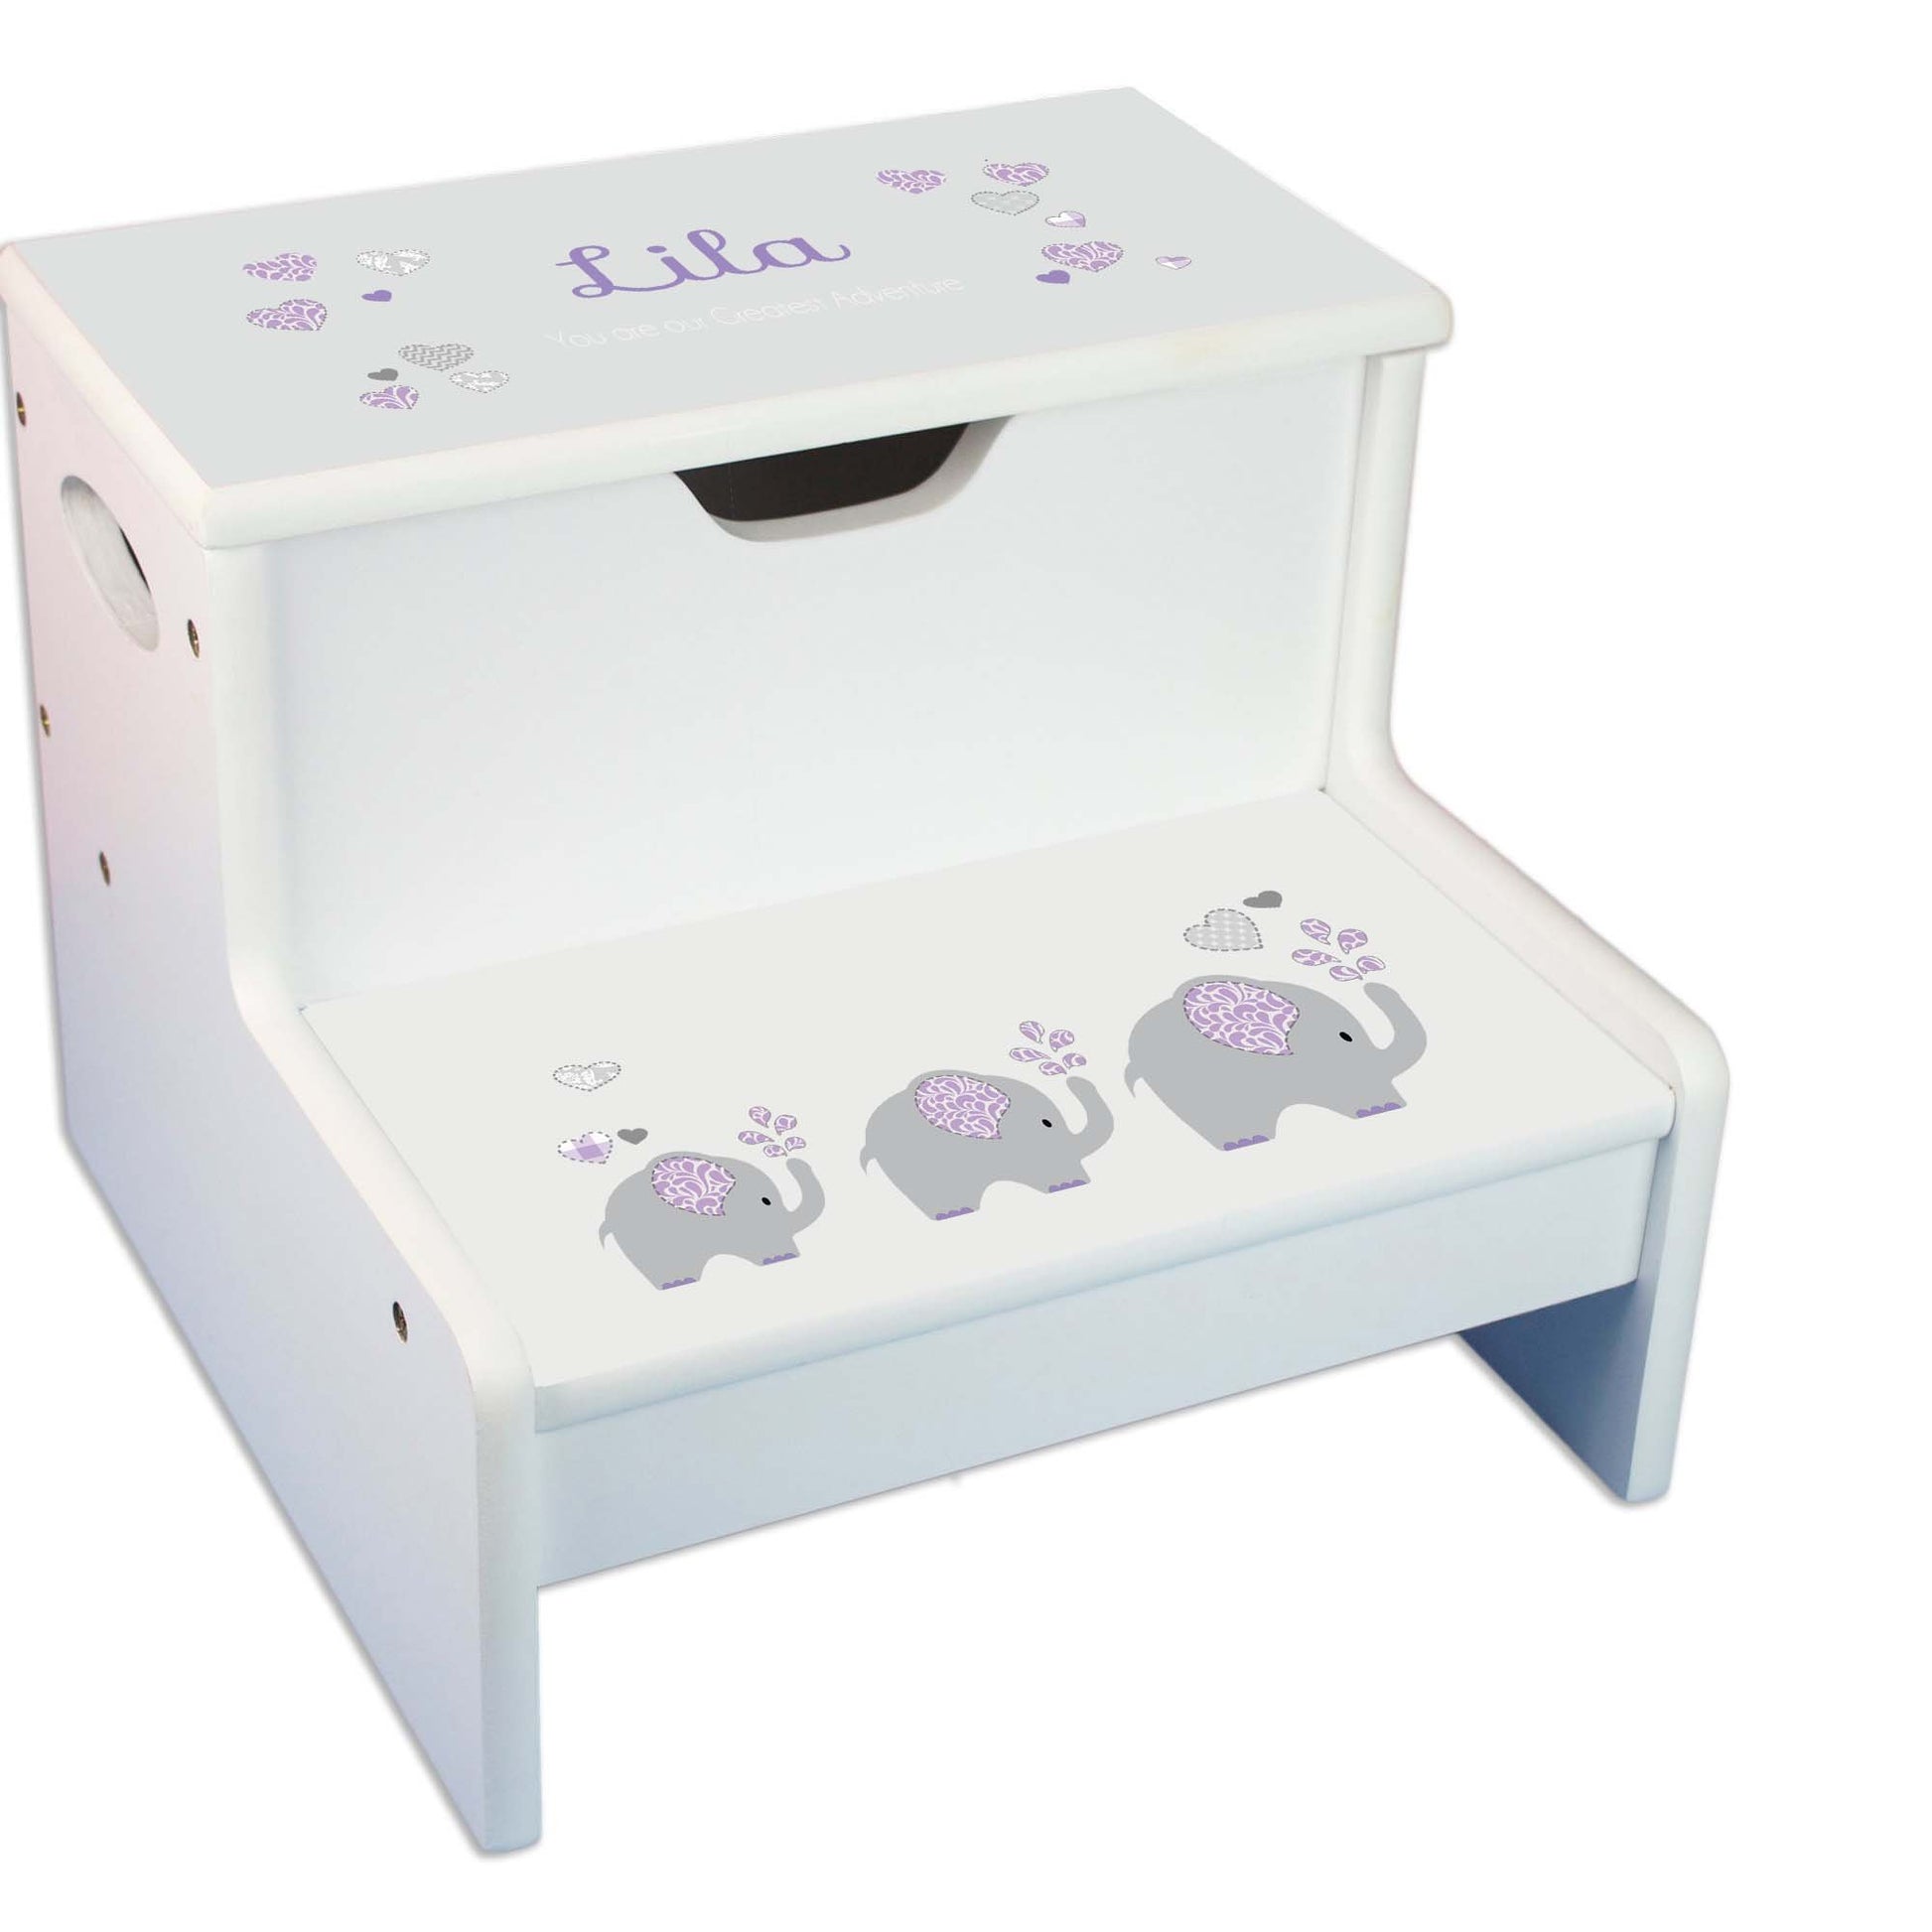 Bright Butterfly Garland Personalized White Storage Step Stool